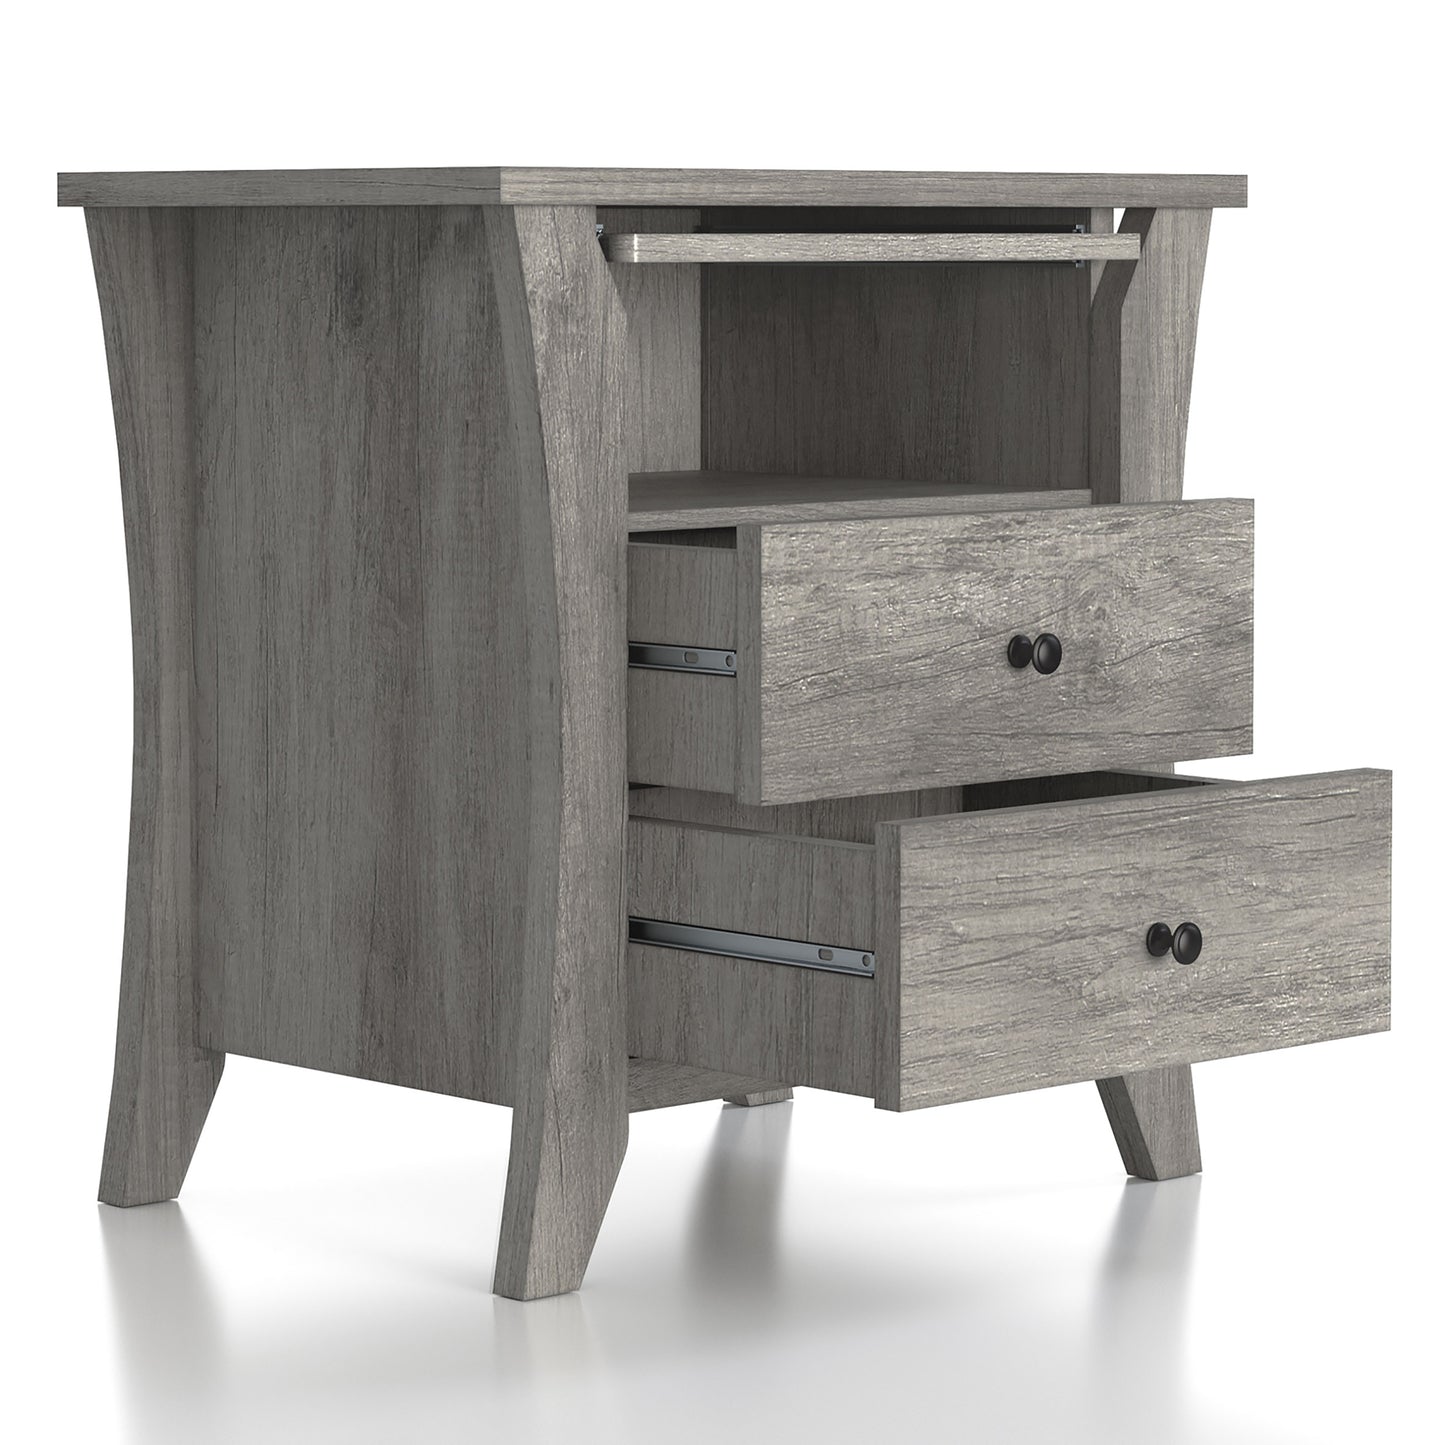 Right angled transitional vintage gray oak two-drawer one-shelf nightstand with tray extended and drawers open on a white background